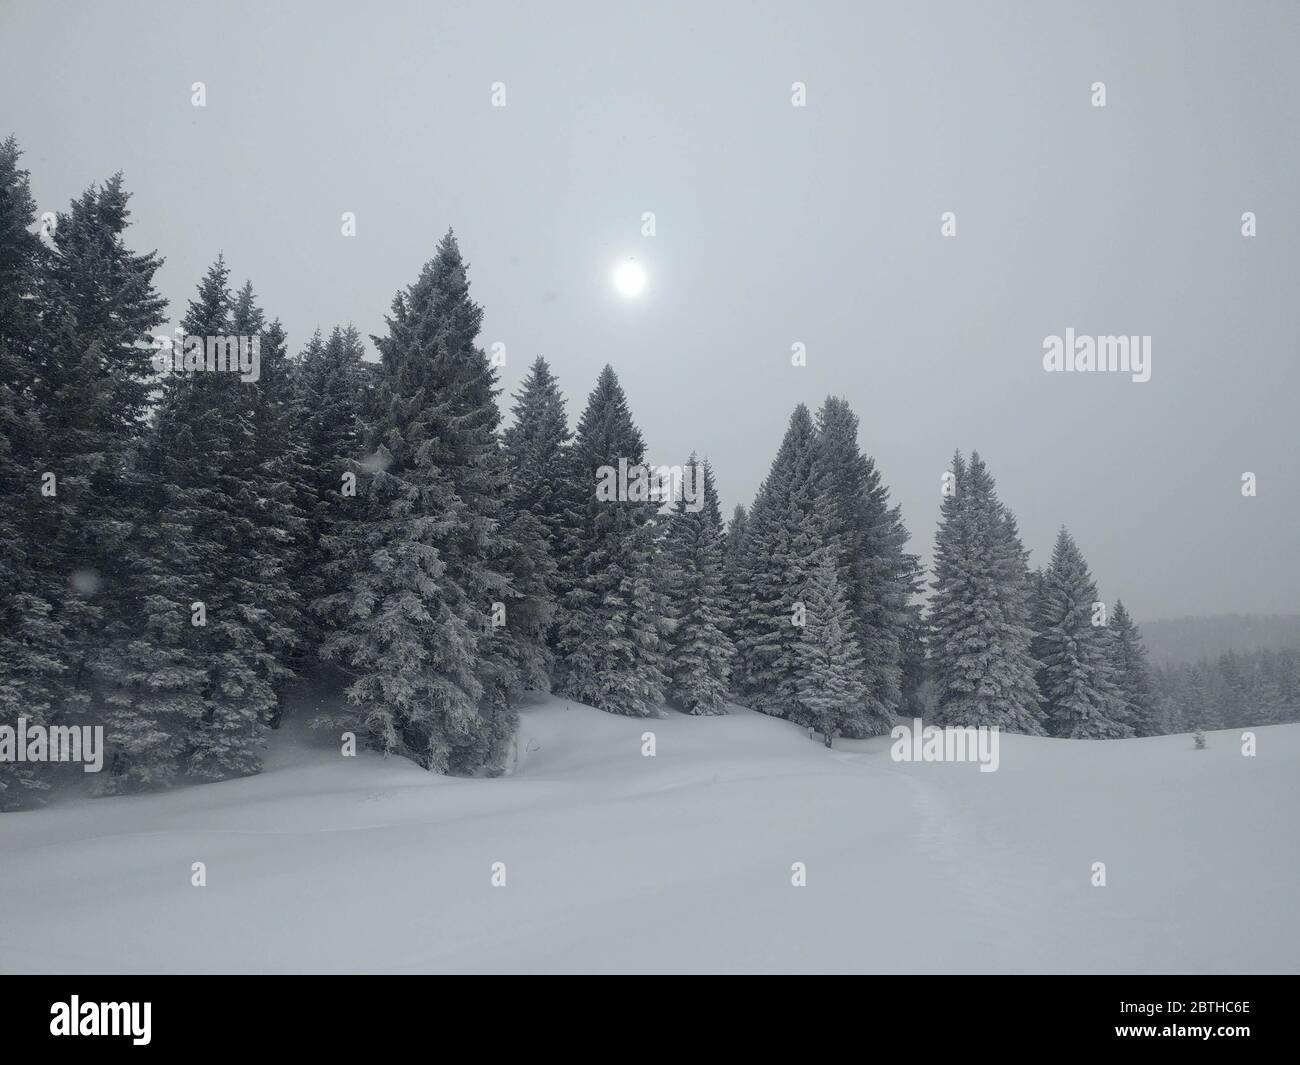 The view of winter landscape with snow covered pines in blizzard, Folgaria ski resort, Italy. Stock Photo